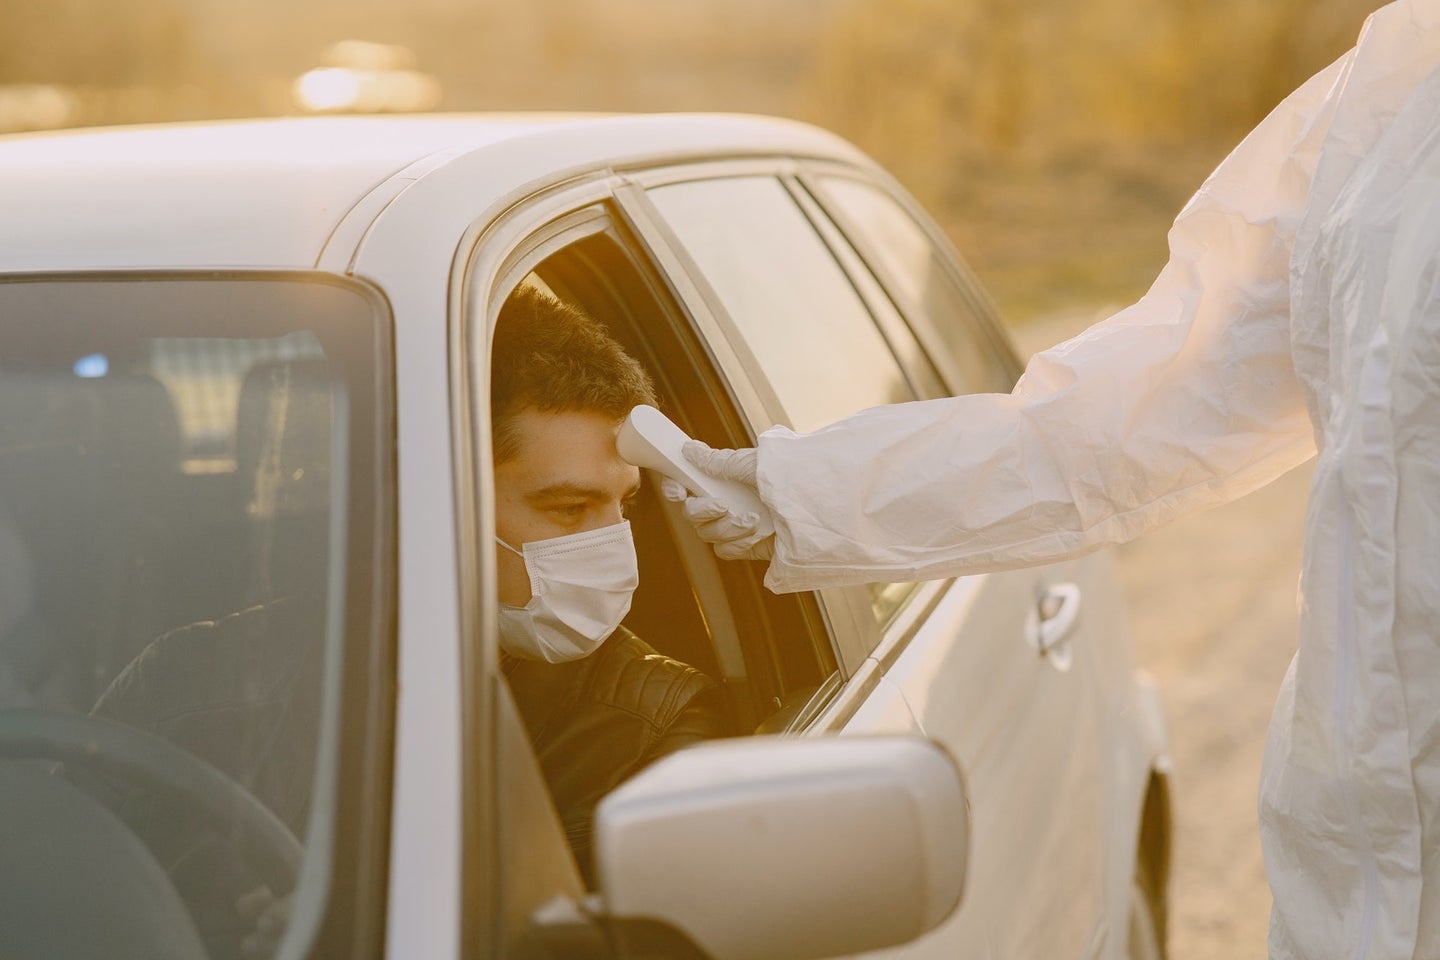 a man in a car wearing a mask is having his temperature taken by someone wearing protective gloves